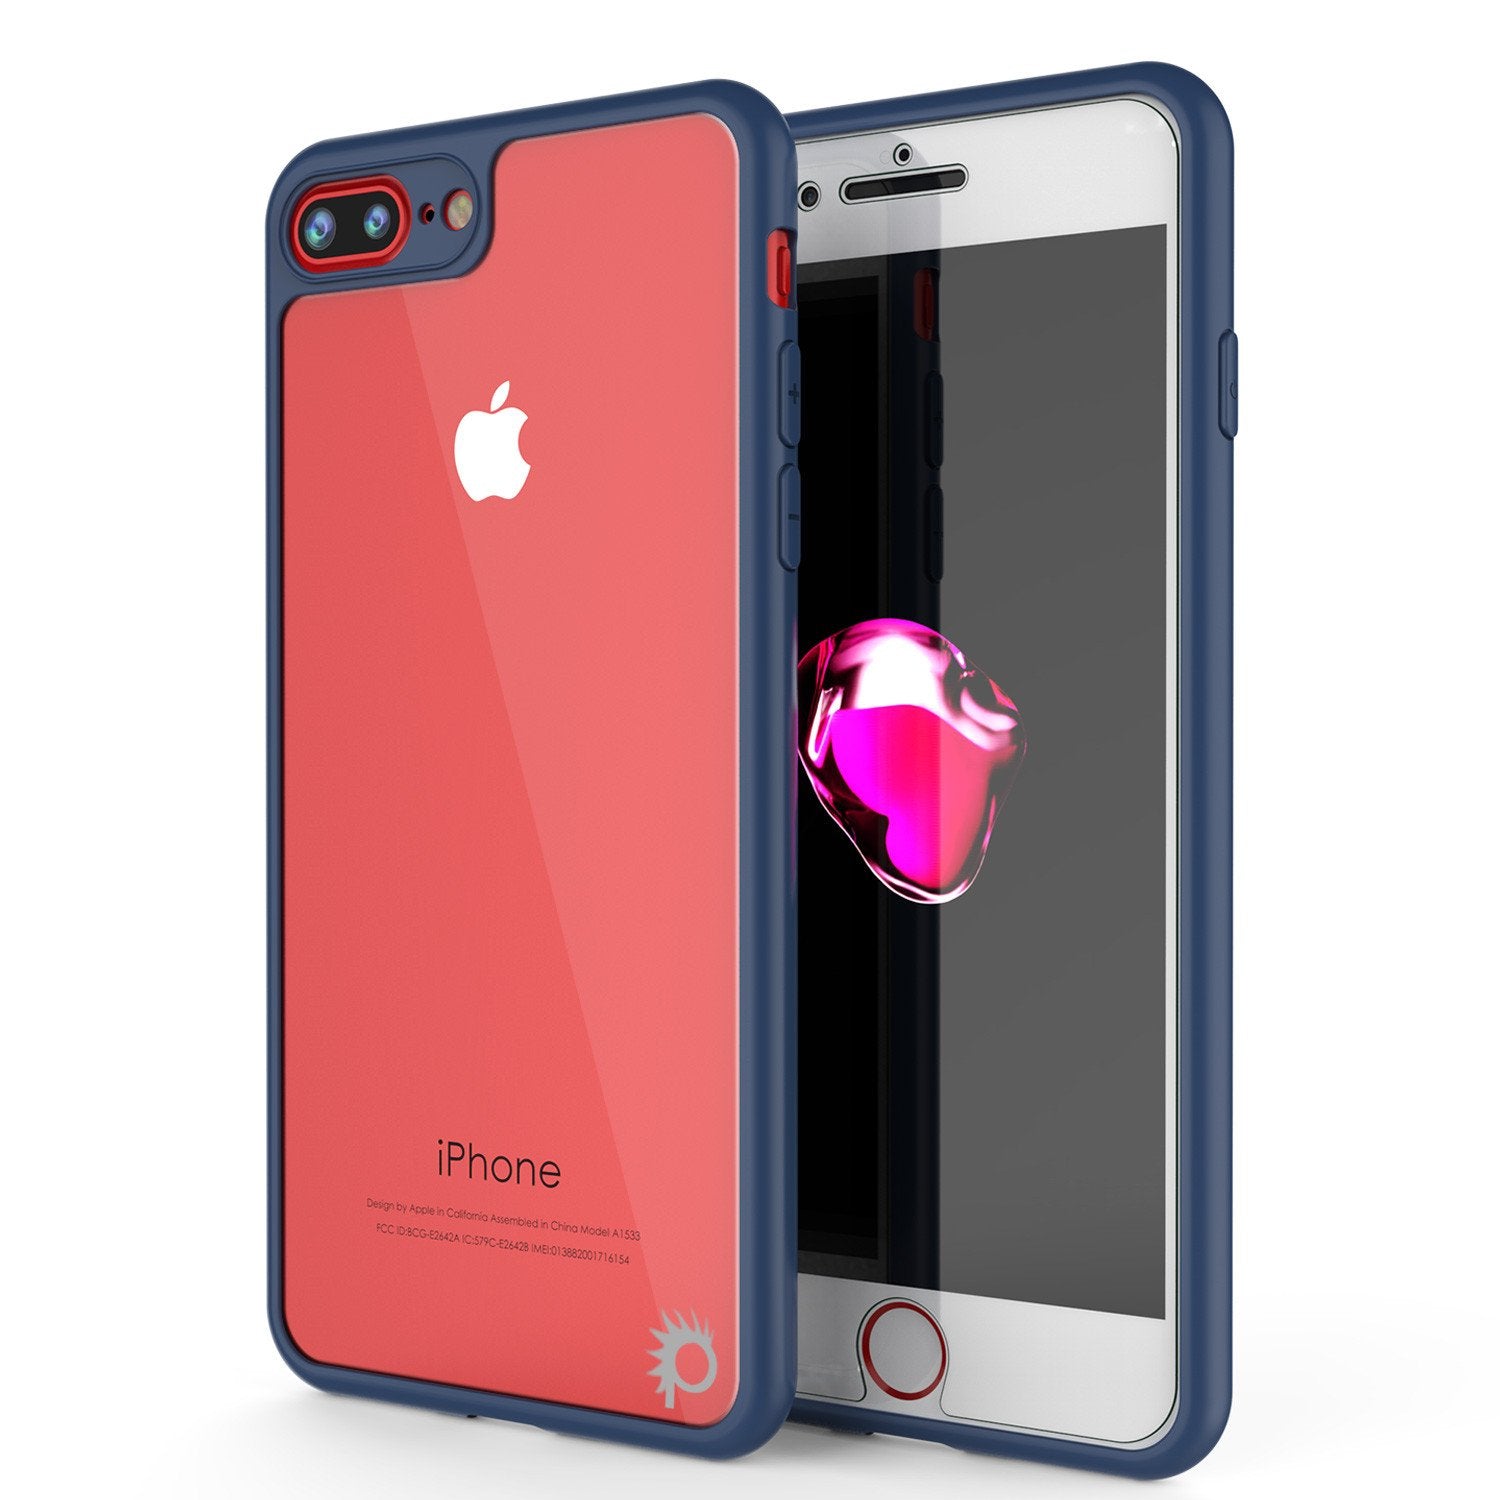 iPhone 7+ Plus Case [MASK Series] [NAVY] Full Body Hybrid Dual Layer TPU Cover W/ protective Tempered Glass Screen Protector